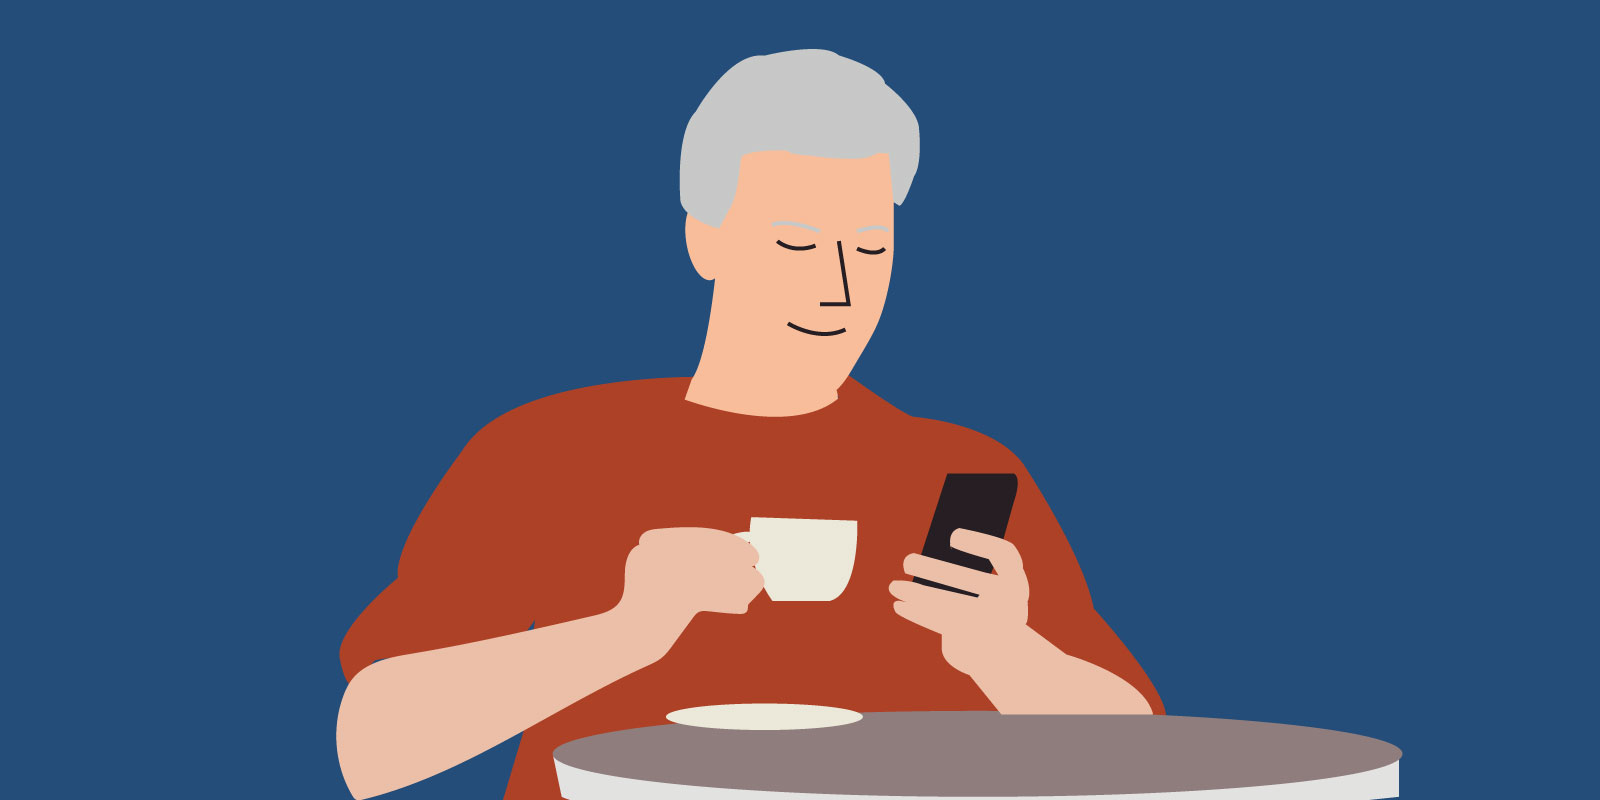 A man sat at a table drinking a coffee and accessing Sleepstation on his mobile phone.